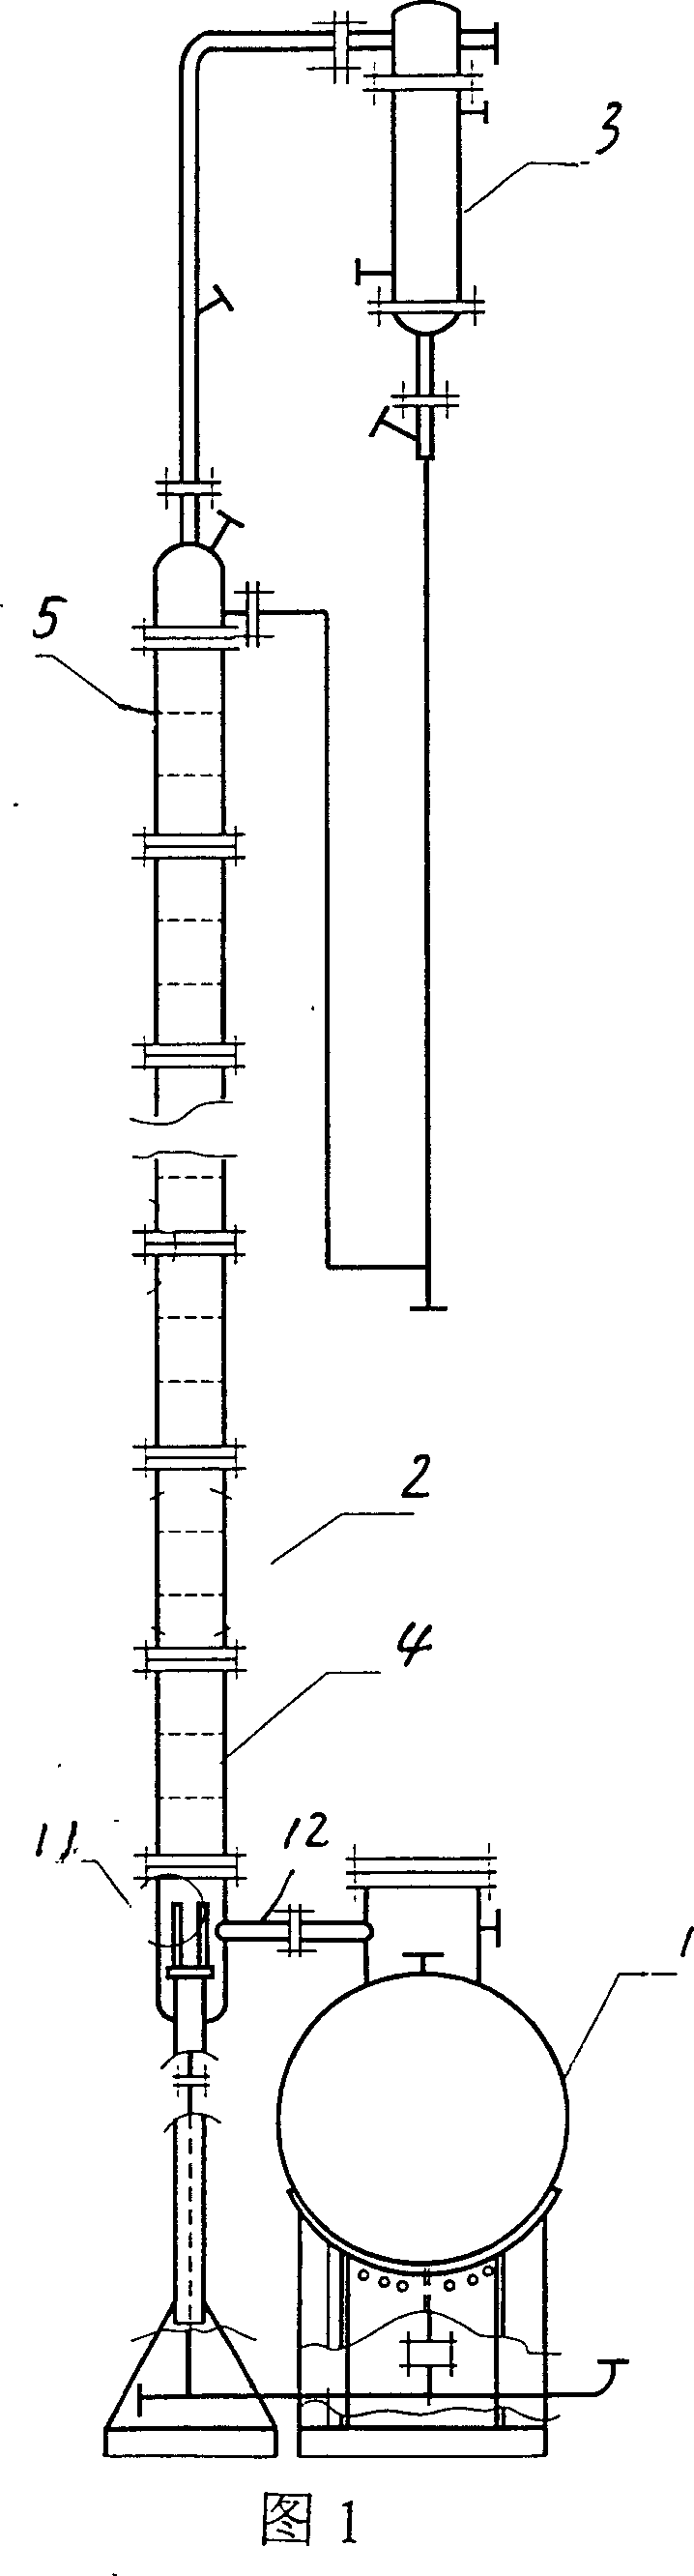 Column-hole type rectification tower